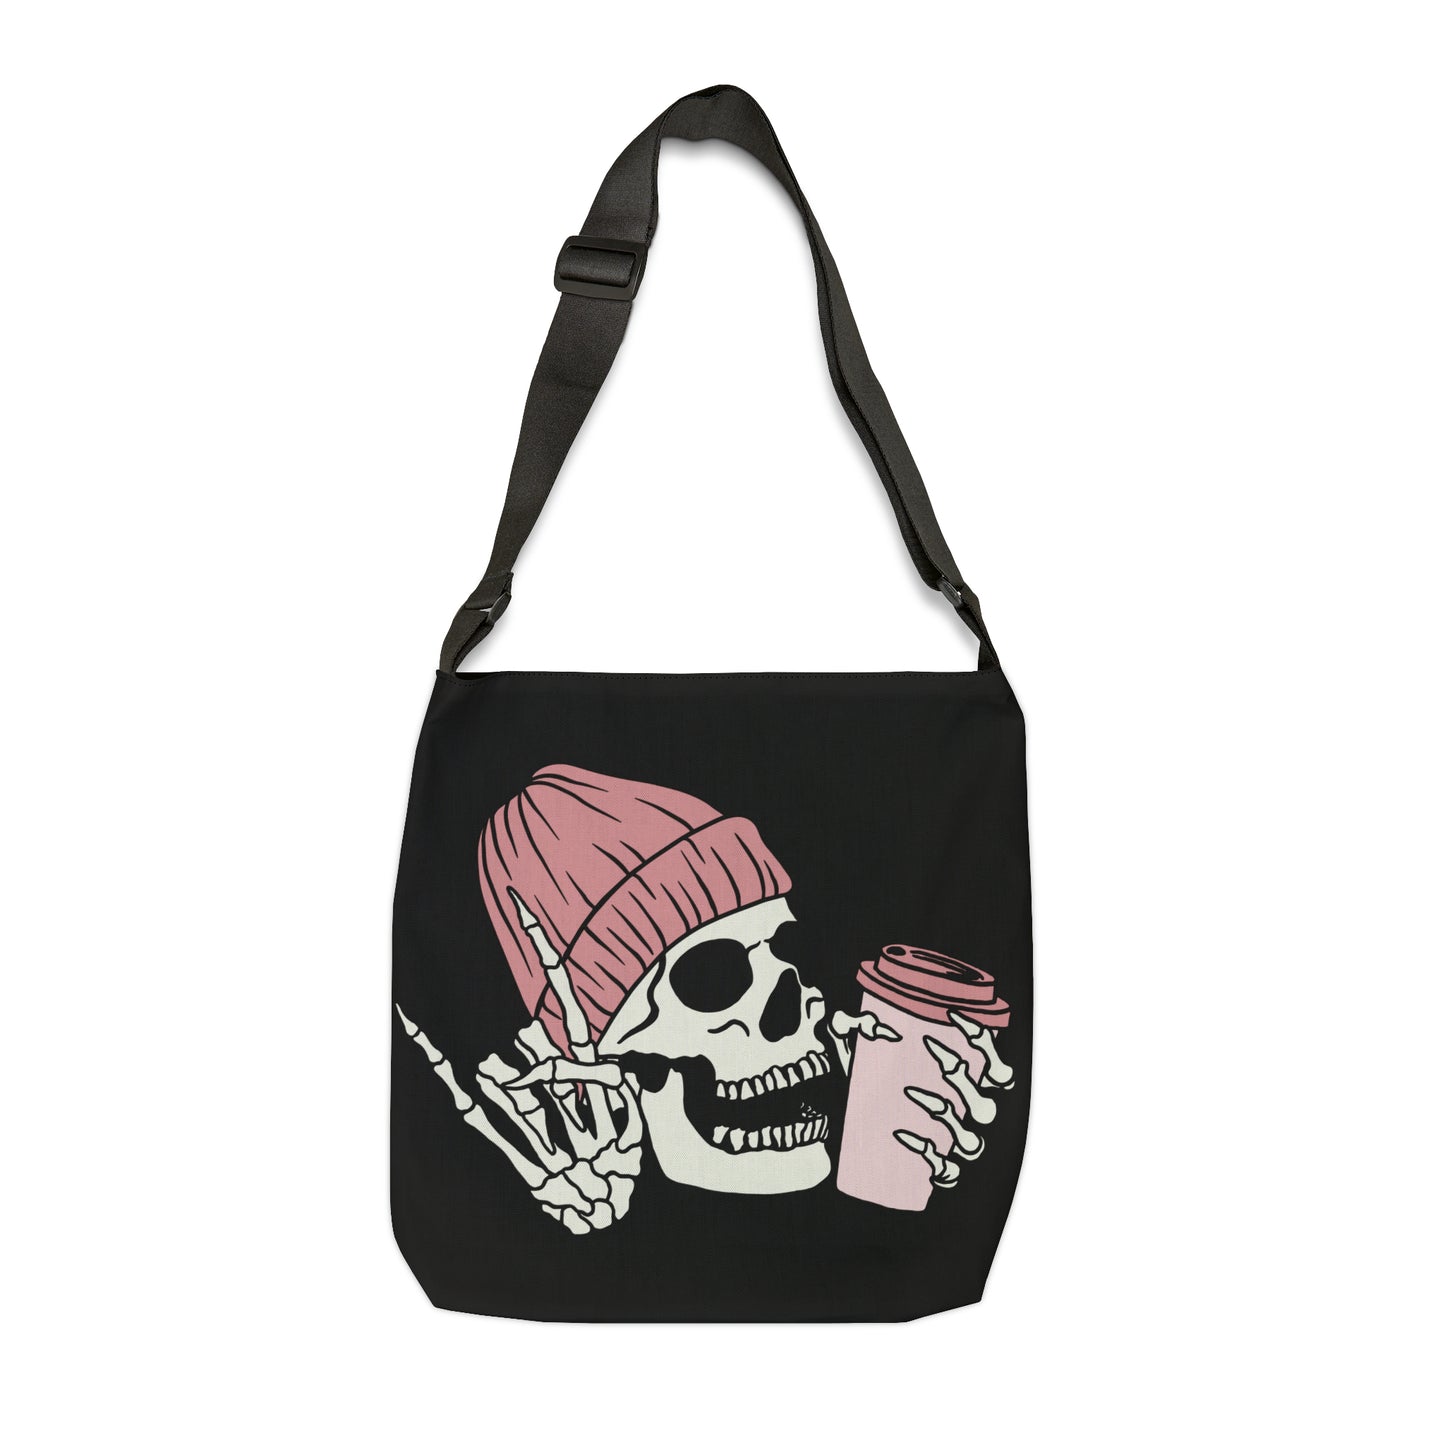 Adjustable Tote Bag (AOP) - Drinking Coffee Skull Tote Bag, Comes in 2 Sizes, Adjustabe Straps